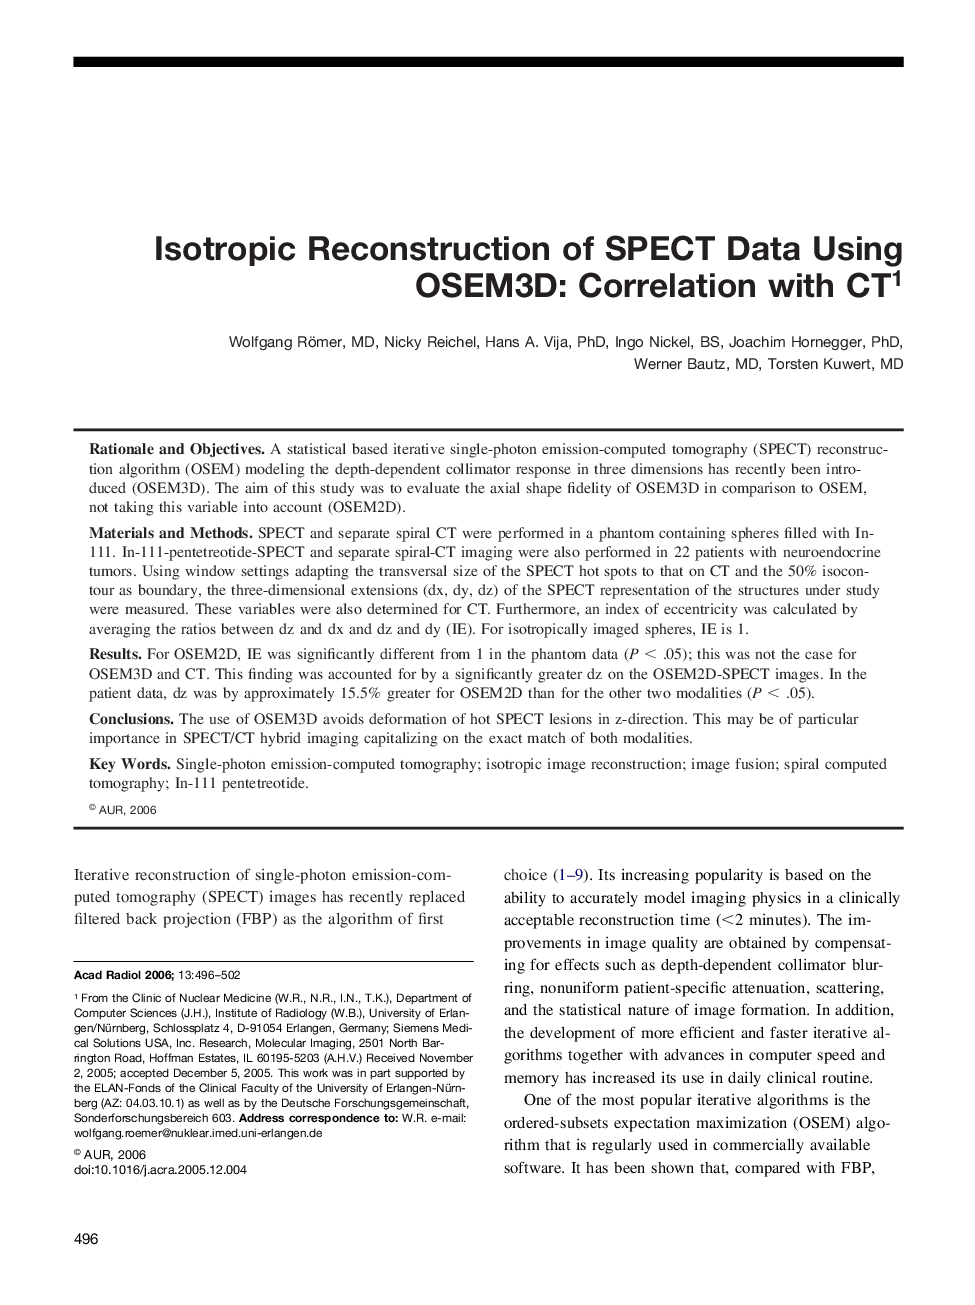 Isotropic Reconstruction of SPECT Data Using OSEM3D: Correlation with CT